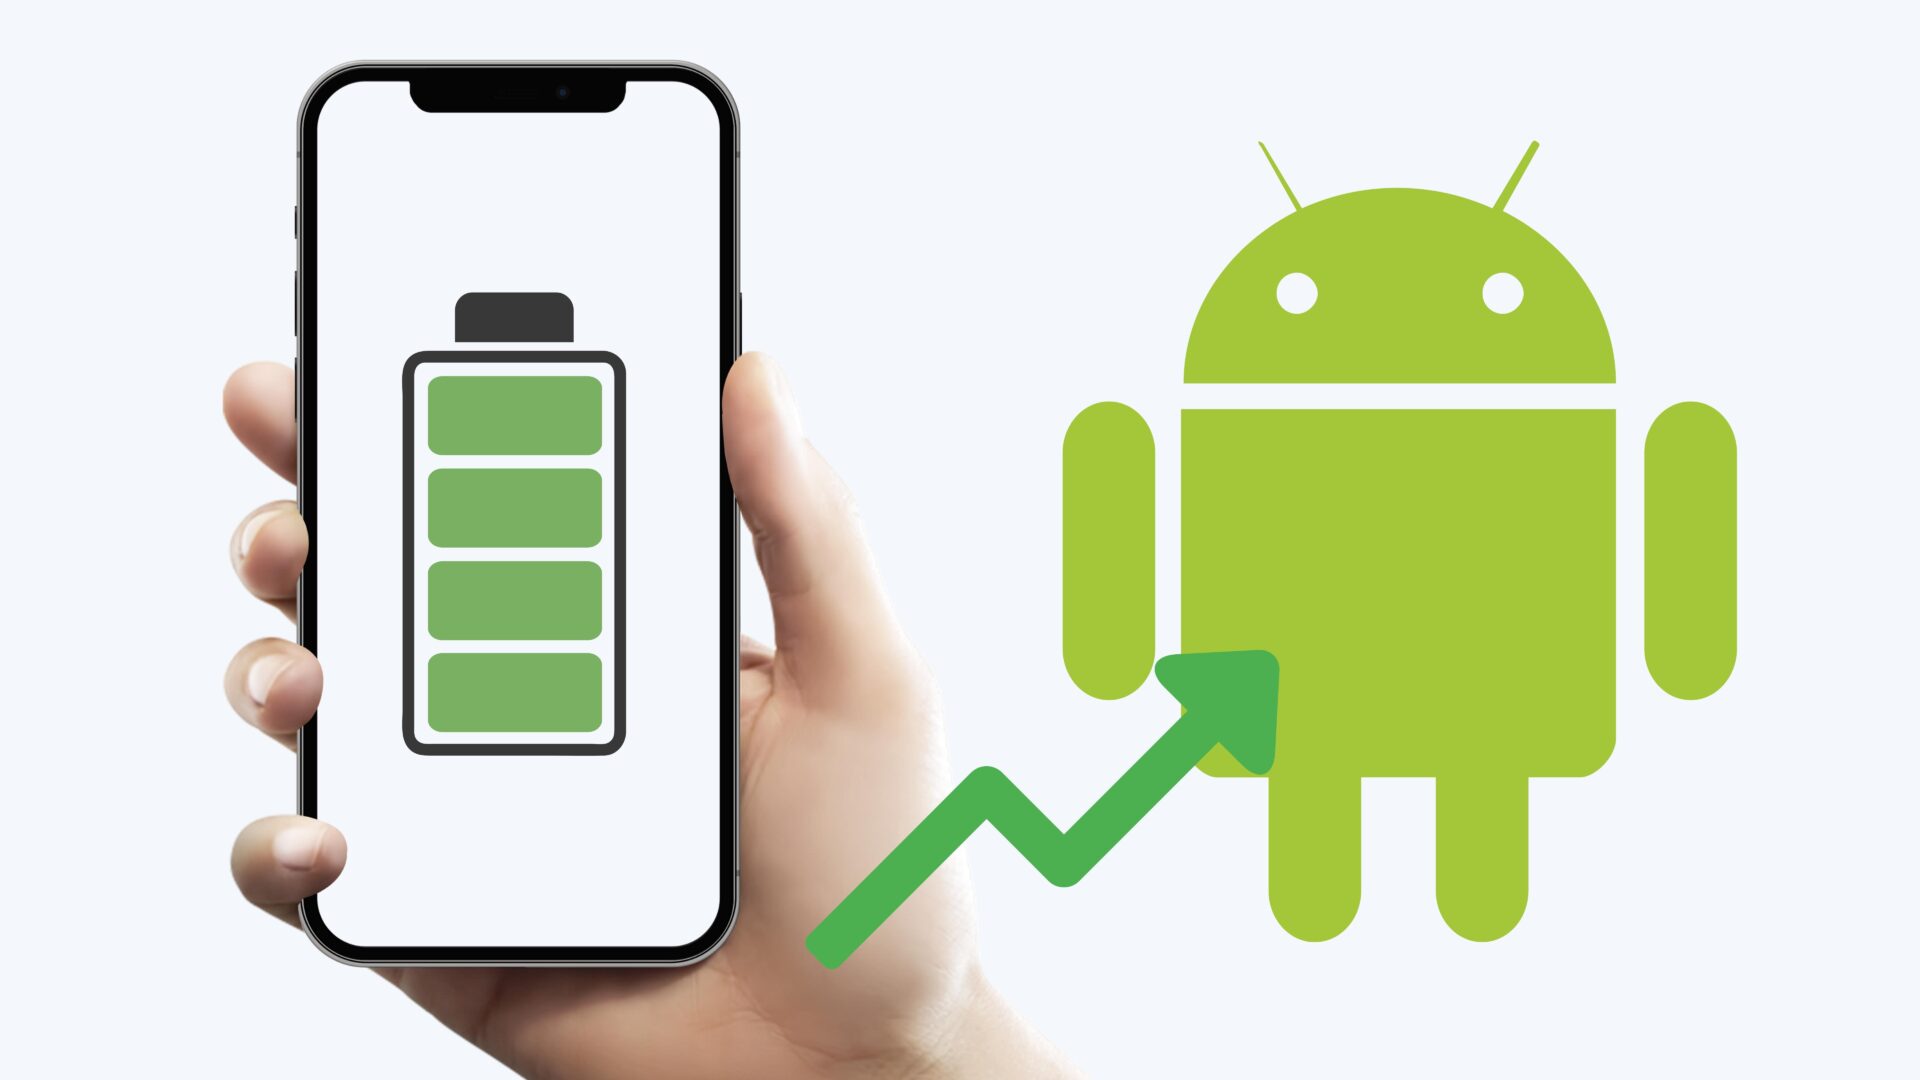 How to Increase Battery Life on Android?